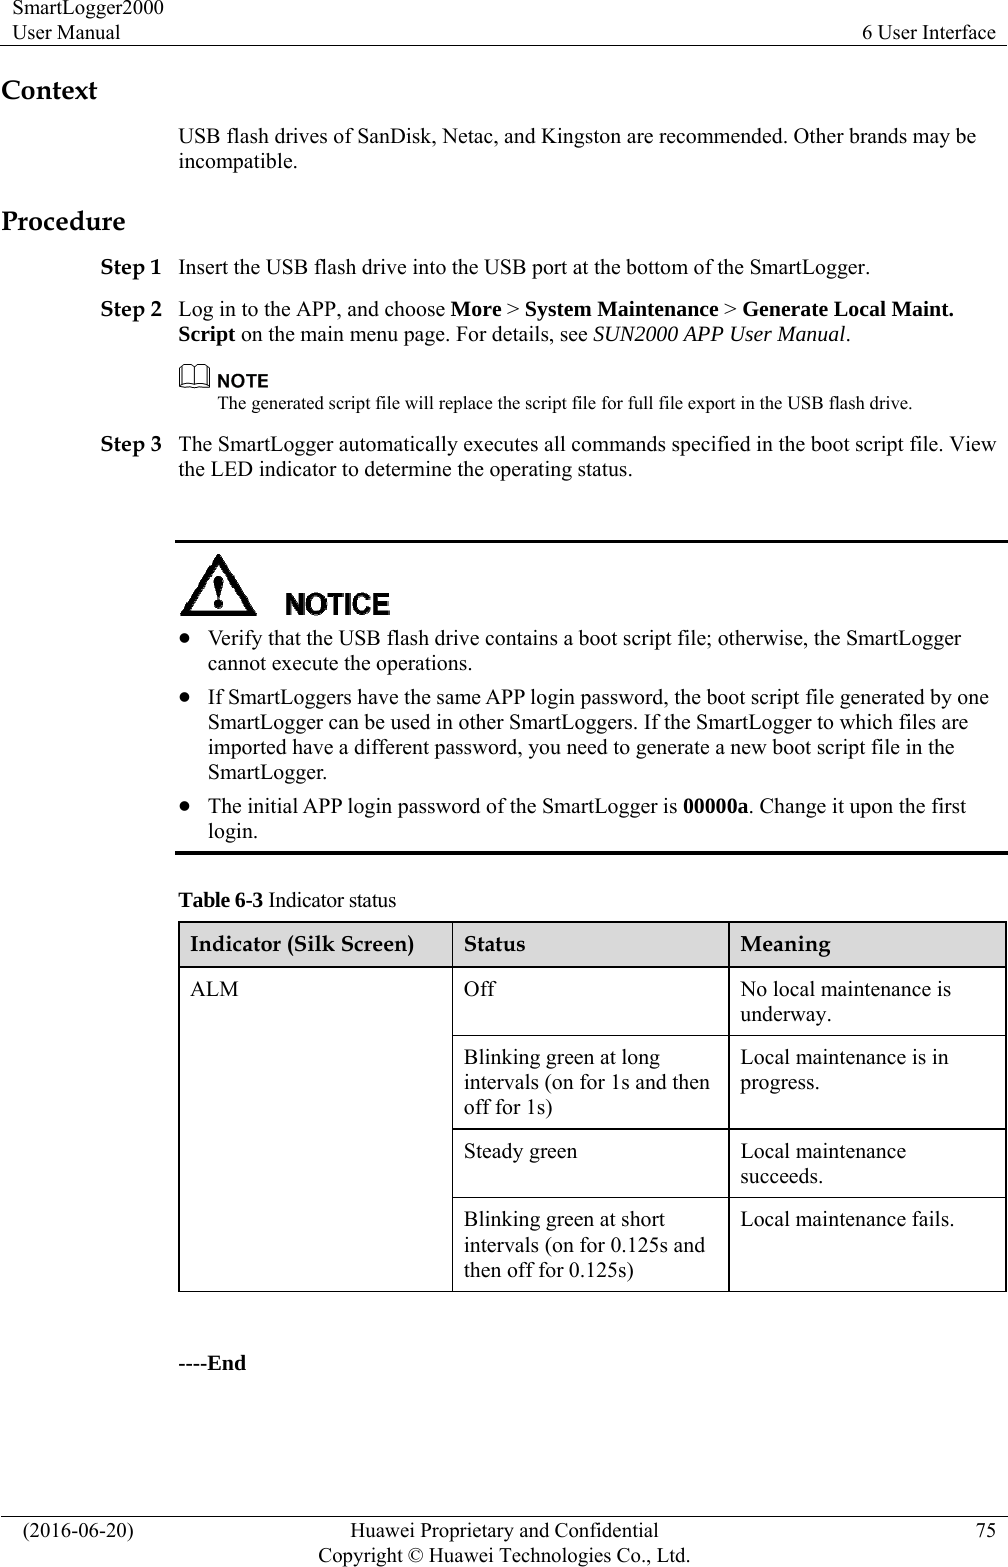 SmartLogger2000 User Manual  6 User Interface   (2016-06-20)  Huawei Proprietary and Confidential         Copyright © Huawei Technologies Co., Ltd.75 Context USB flash drives of SanDisk, Netac, and Kingston are recommended. Other brands may be incompatible. Procedure Step 1 Insert the USB flash drive into the USB port at the bottom of the SmartLogger. Step 2 Log in to the APP, and choose More &gt; System Maintenance &gt; Generate Local Maint. Script on the main menu page. For details, see SUN2000 APP User Manual.   The generated script file will replace the script file for full file export in the USB flash drive. Step 3 The SmartLogger automatically executes all commands specified in the boot script file. View the LED indicator to determine the operating status.      Verify that the USB flash drive contains a boot script file; otherwise, the SmartLogger cannot execute the operations.    If SmartLoggers have the same APP login password, the boot script file generated by one SmartLogger can be used in other SmartLoggers. If the SmartLogger to which files are imported have a different password, you need to generate a new boot script file in the SmartLogger.  The initial APP login password of the SmartLogger is 00000a. Change it upon the first login.  Table 6-3 Indicator status Indicator (Silk Screen)  Status  Meaning ALM  Off  No local maintenance is underway.  Blinking green at long intervals (on for 1s and then off for 1s) Local maintenance is in progress. Steady green  Local maintenance succeeds. Blinking green at short intervals (on for 0.125s and then off for 0.125s) Local maintenance fails.  ----End 